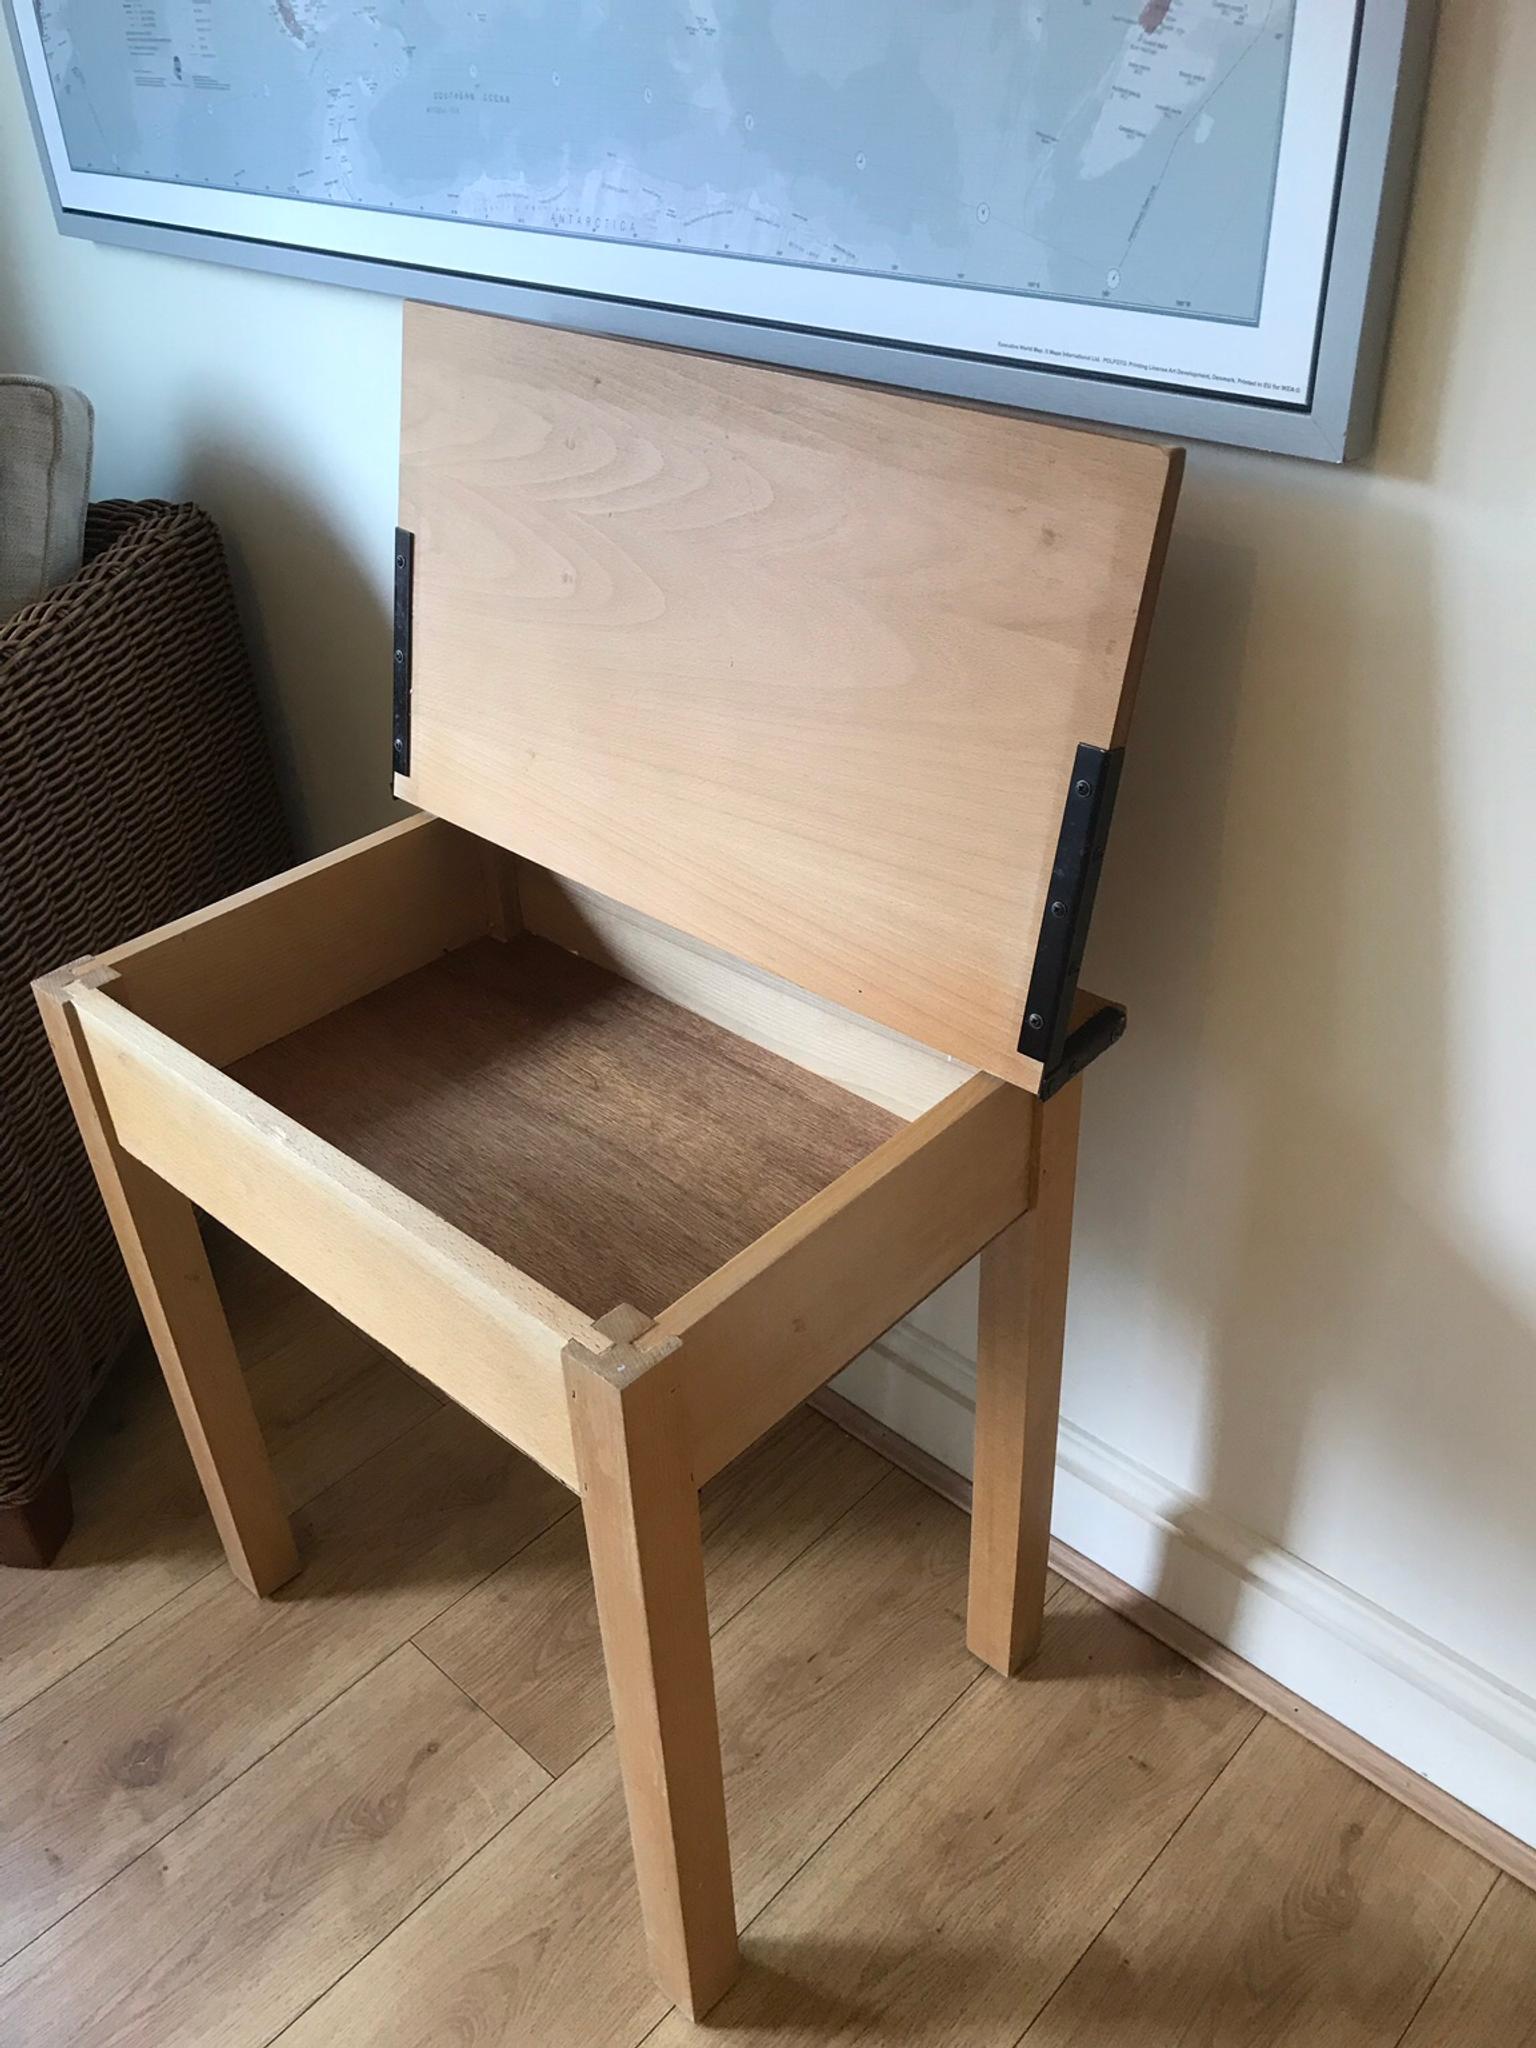 Child S School Desk In B62 Dudley For 25 00 For Sale Shpock